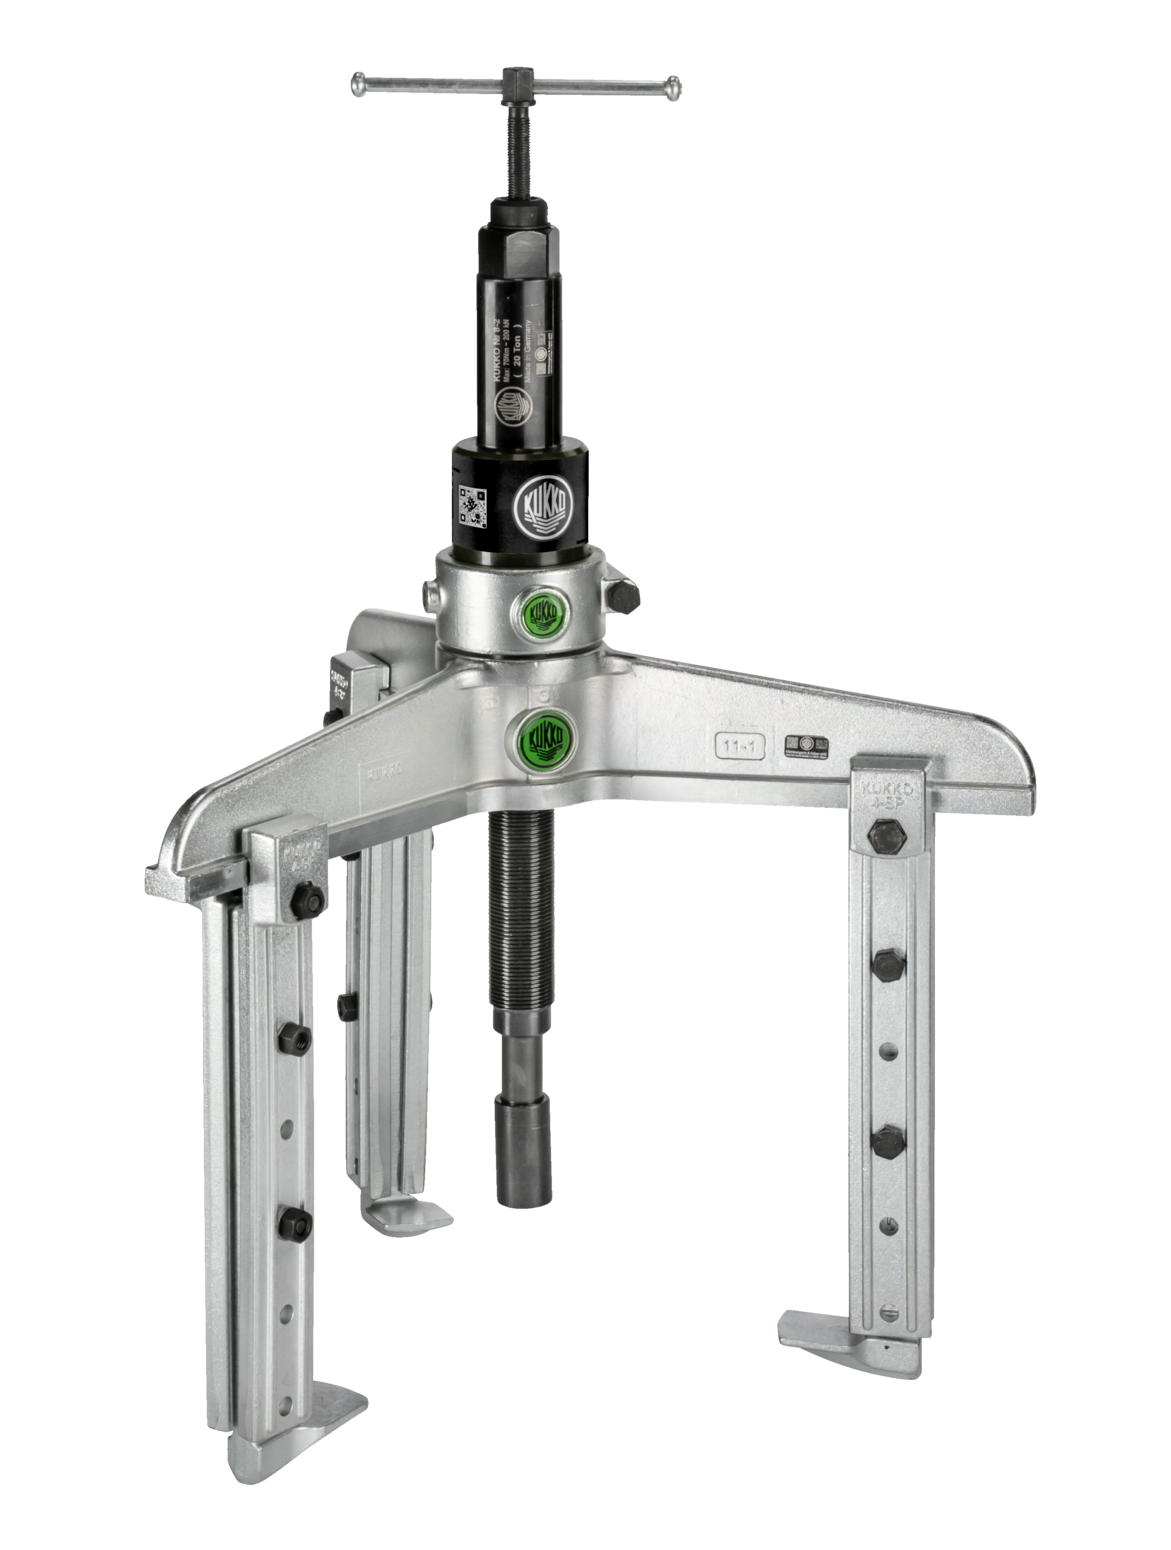 Kukko 11-1-BV Extra strong, 3-arm universal puller with adjustable clamping depth and grease-hydraulic spindle